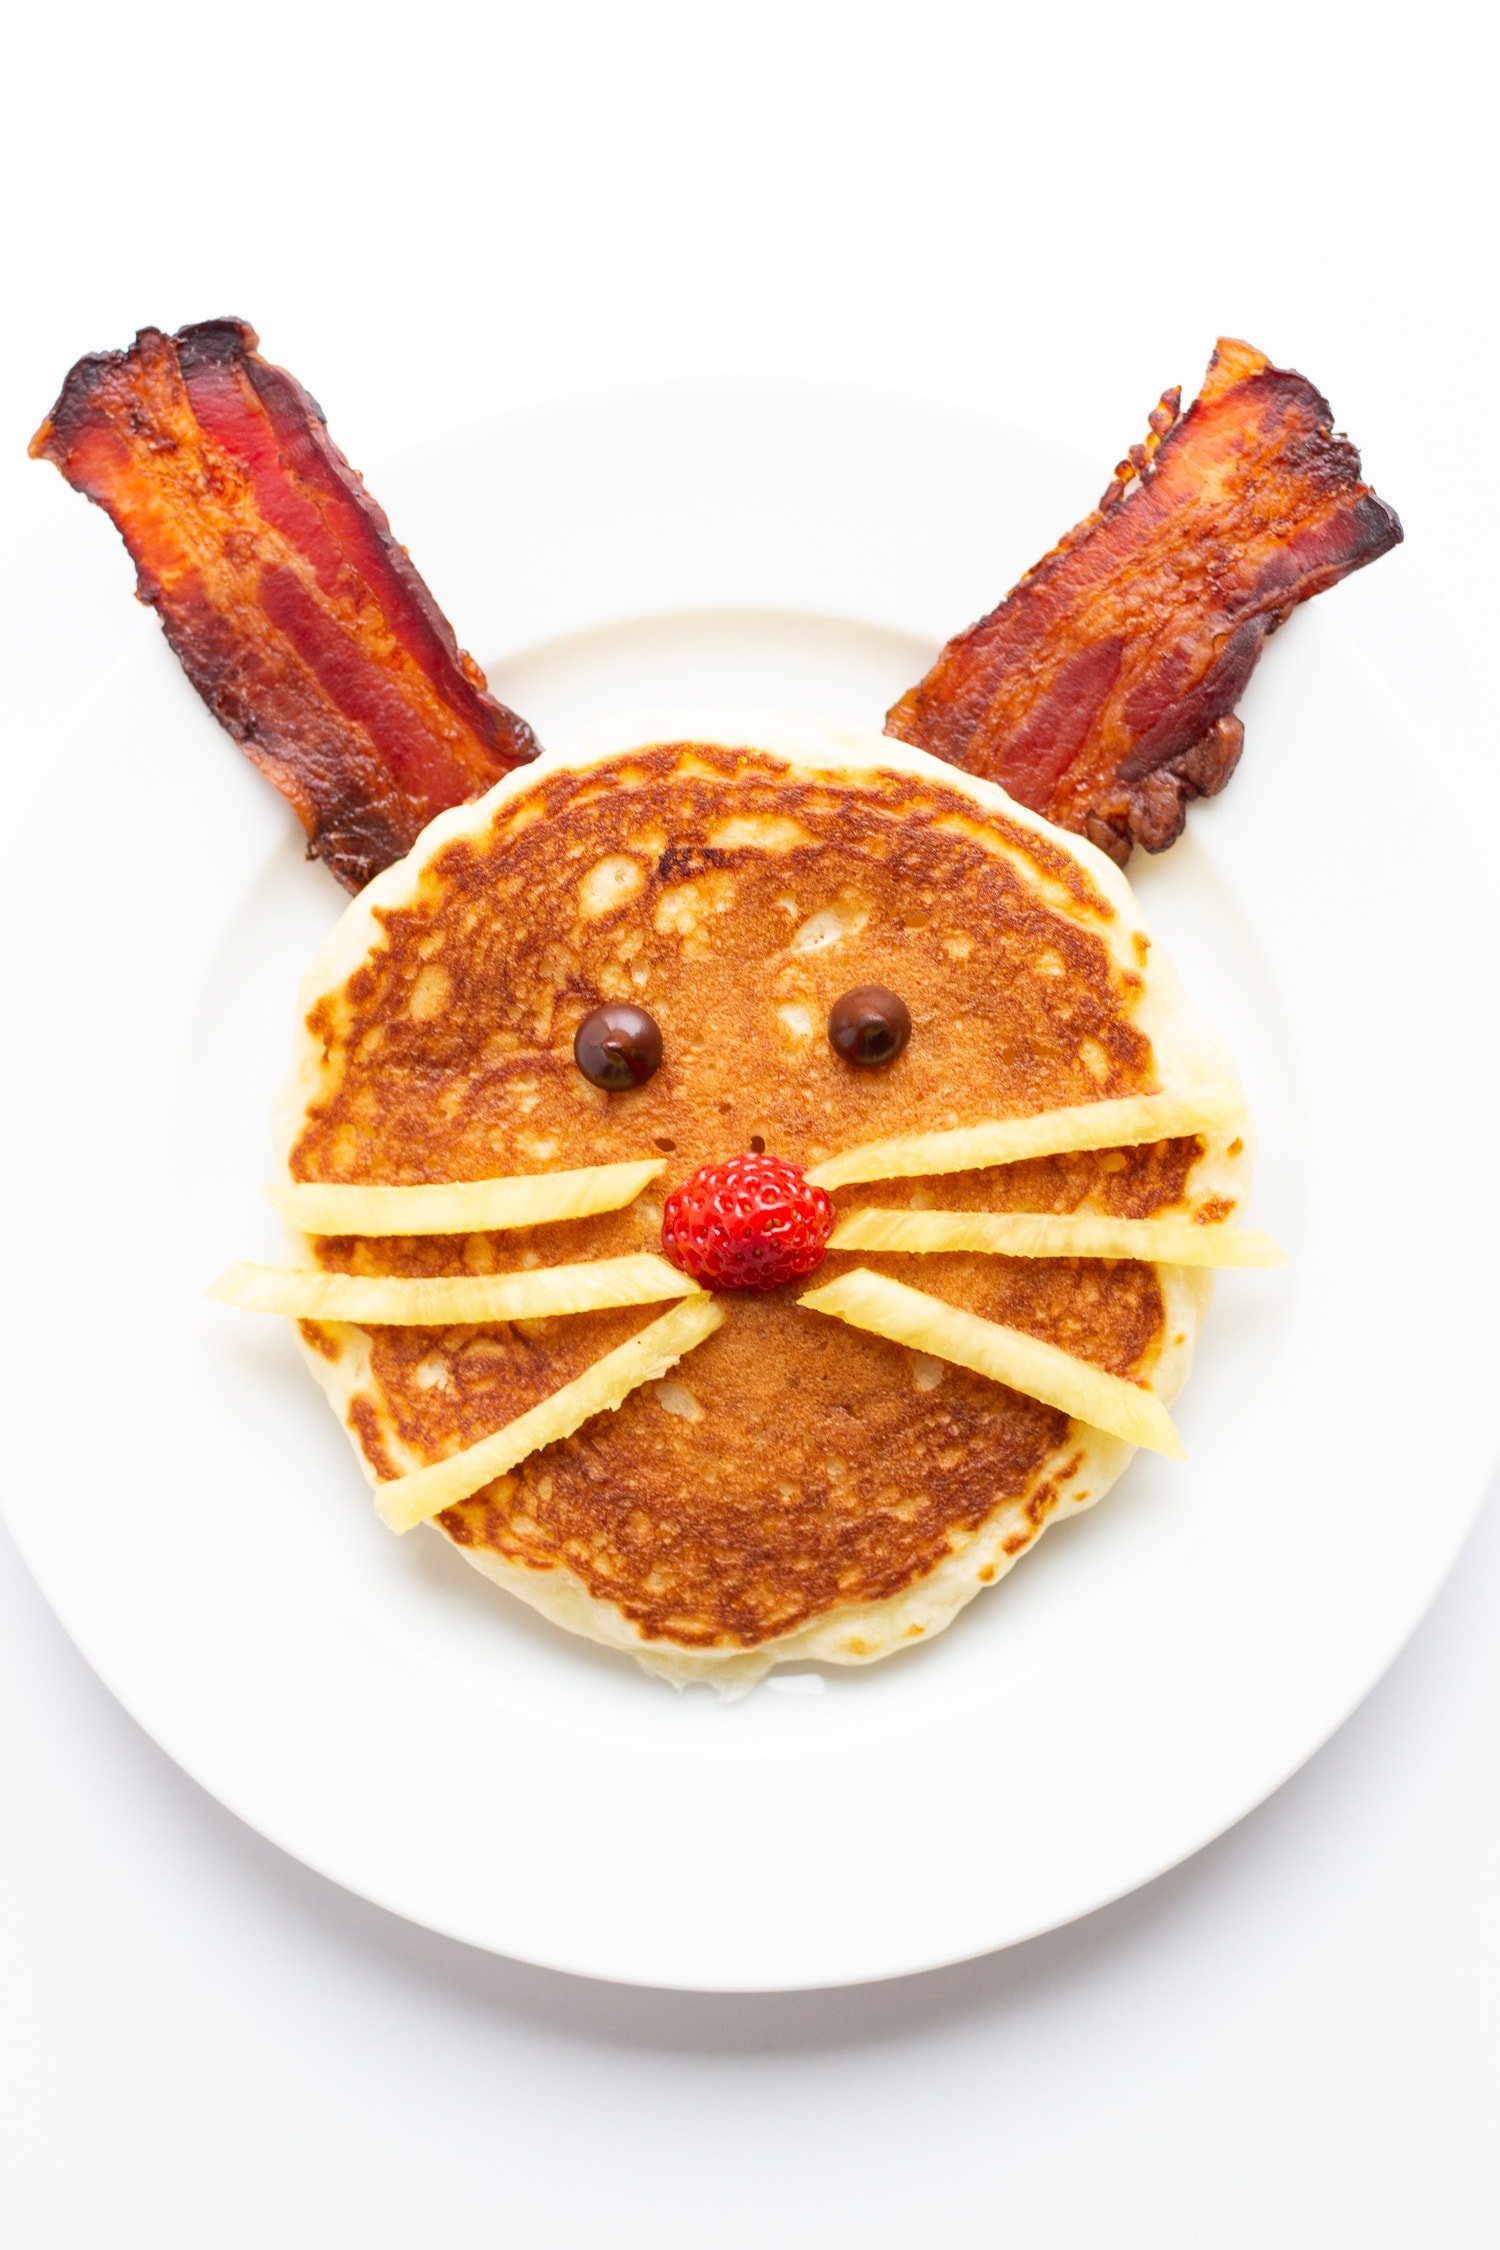 Easter Bunny pancake on a white plate with bacon for ears, chocolate chips for eyes, strawberry for a nose and thin pineapple strips for whiskers.